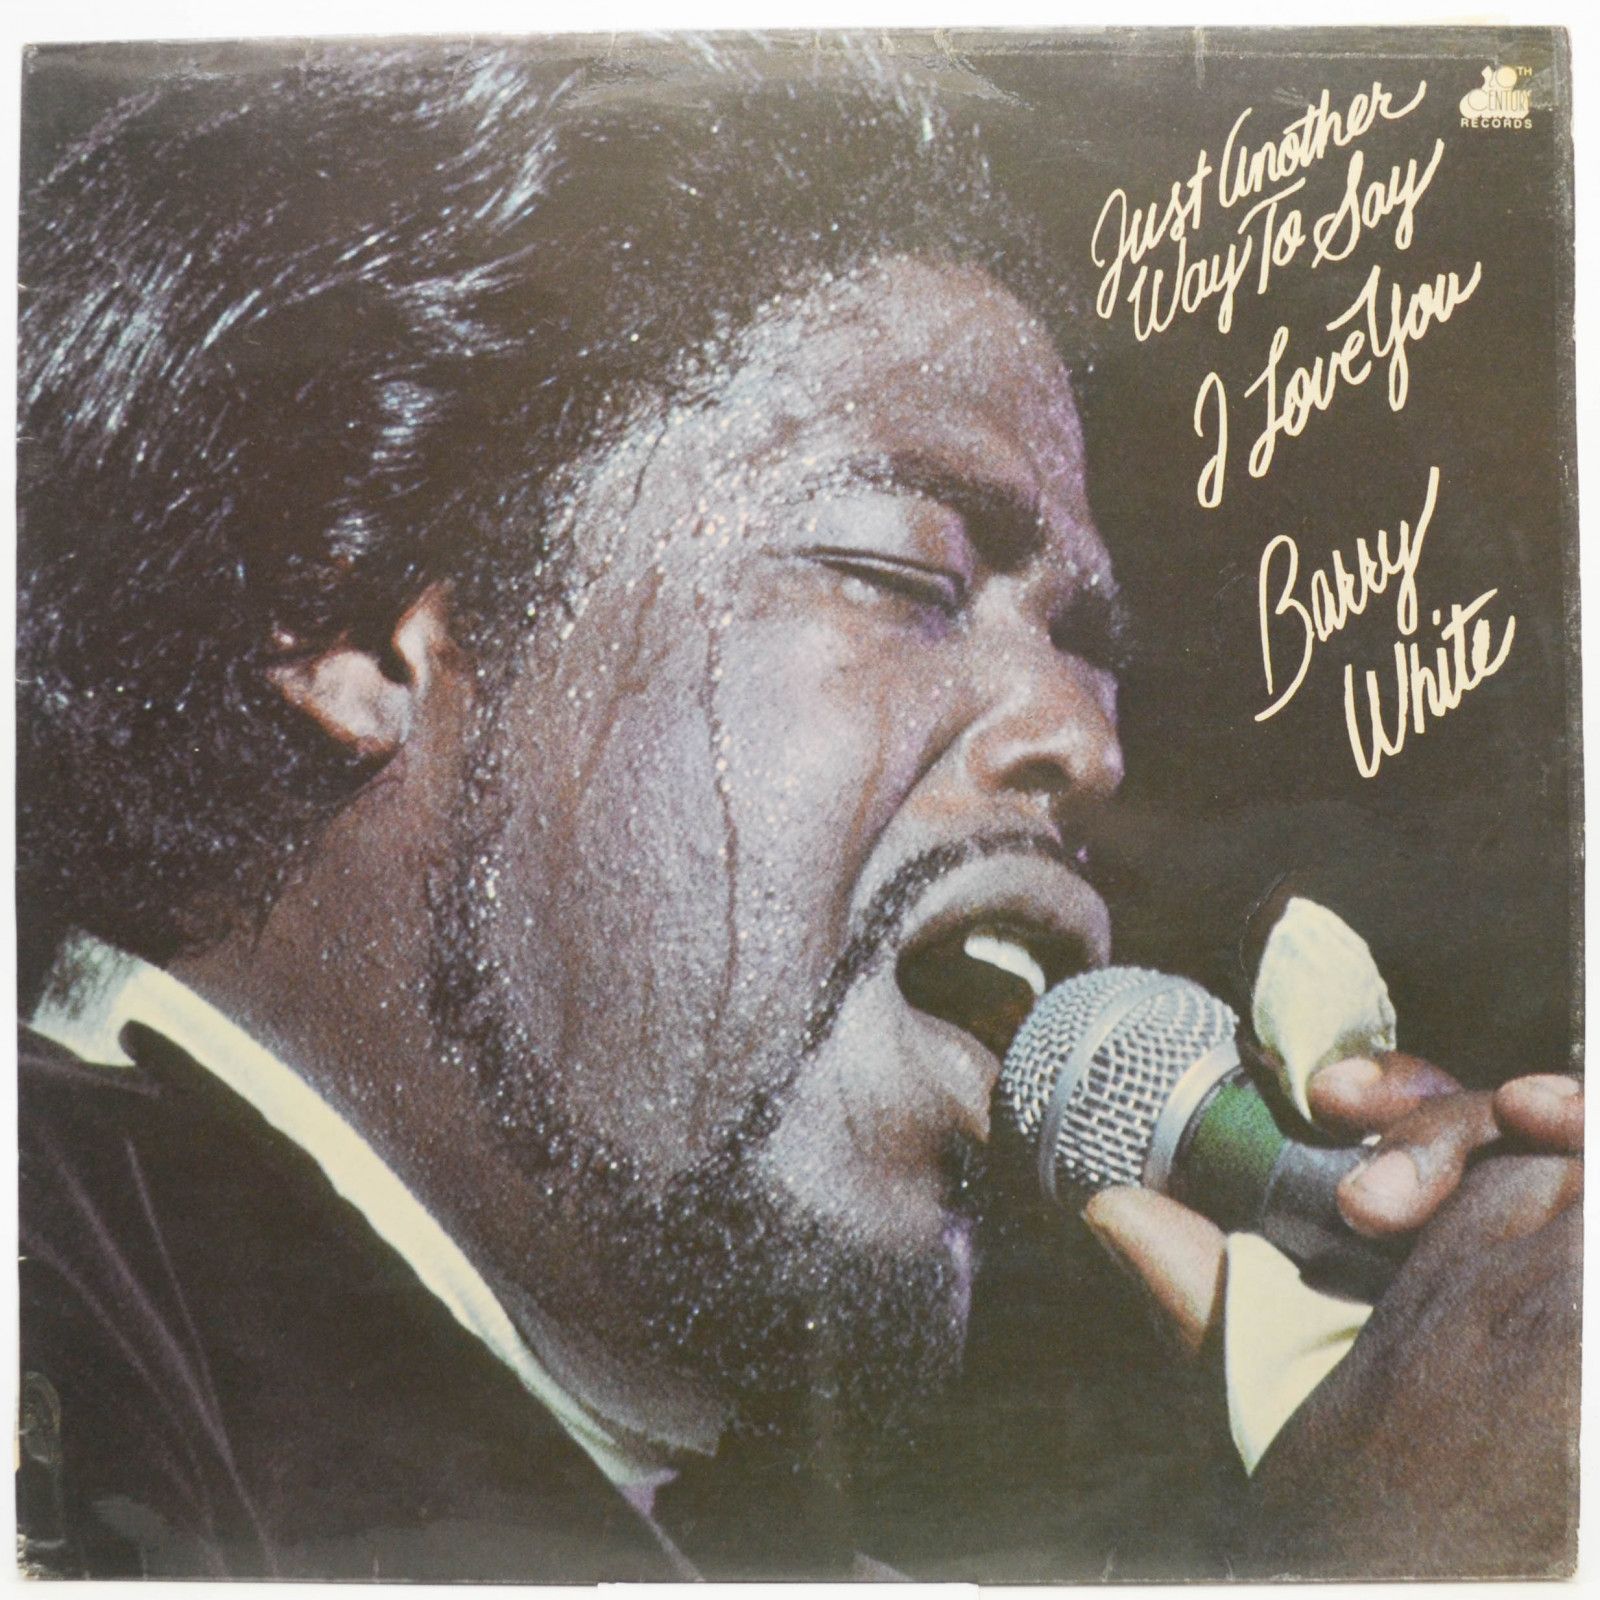 Barry White — Just Another Way To Say I Love You (UK), 1975